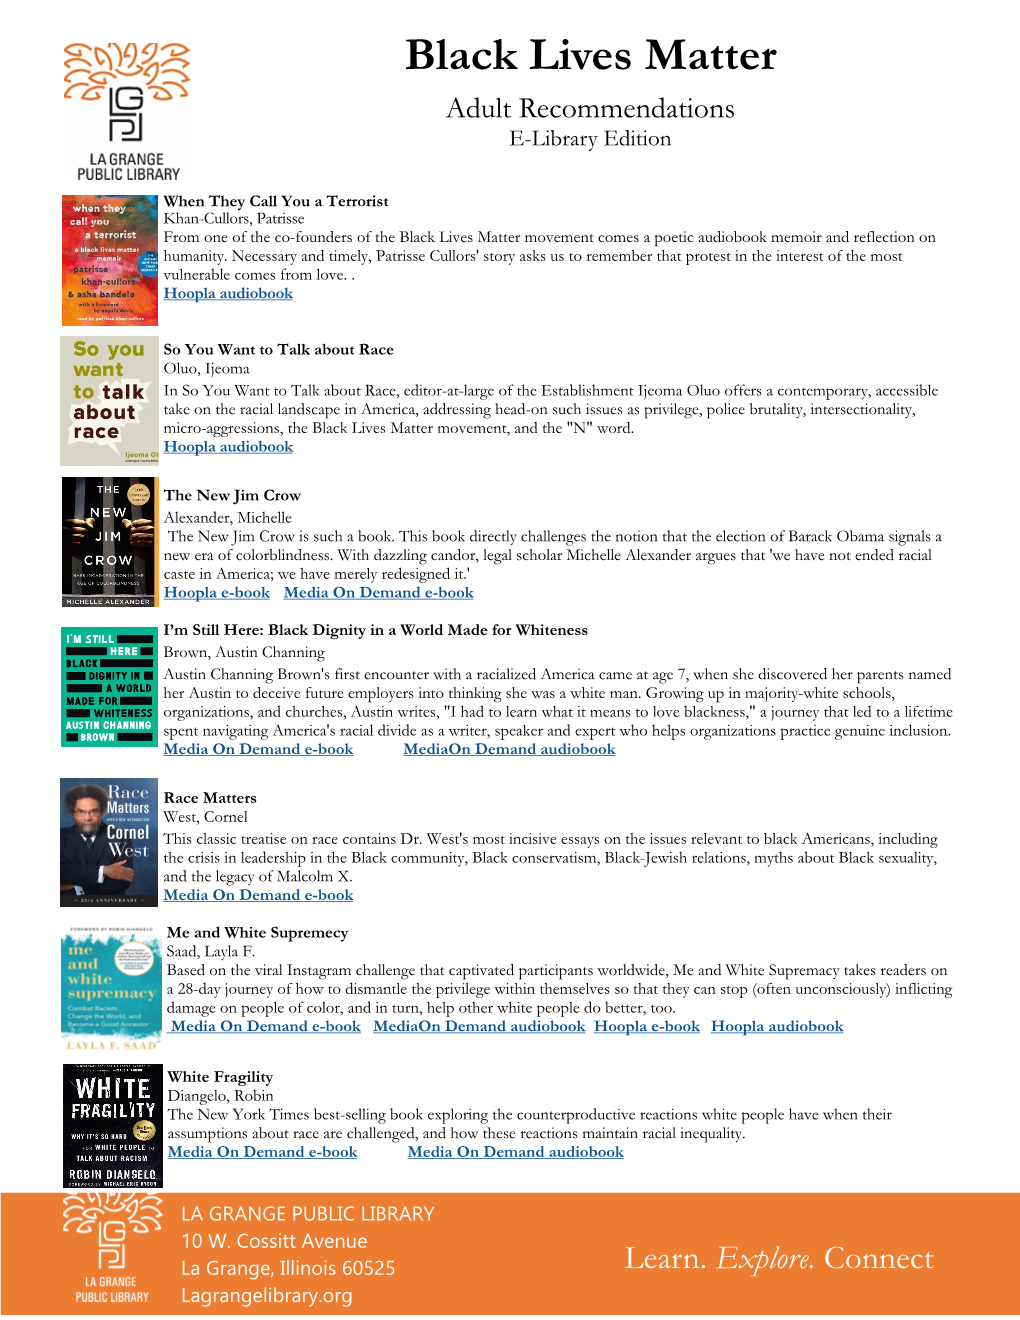 Black Lives Matter Adult Recommendations E-Library Edition